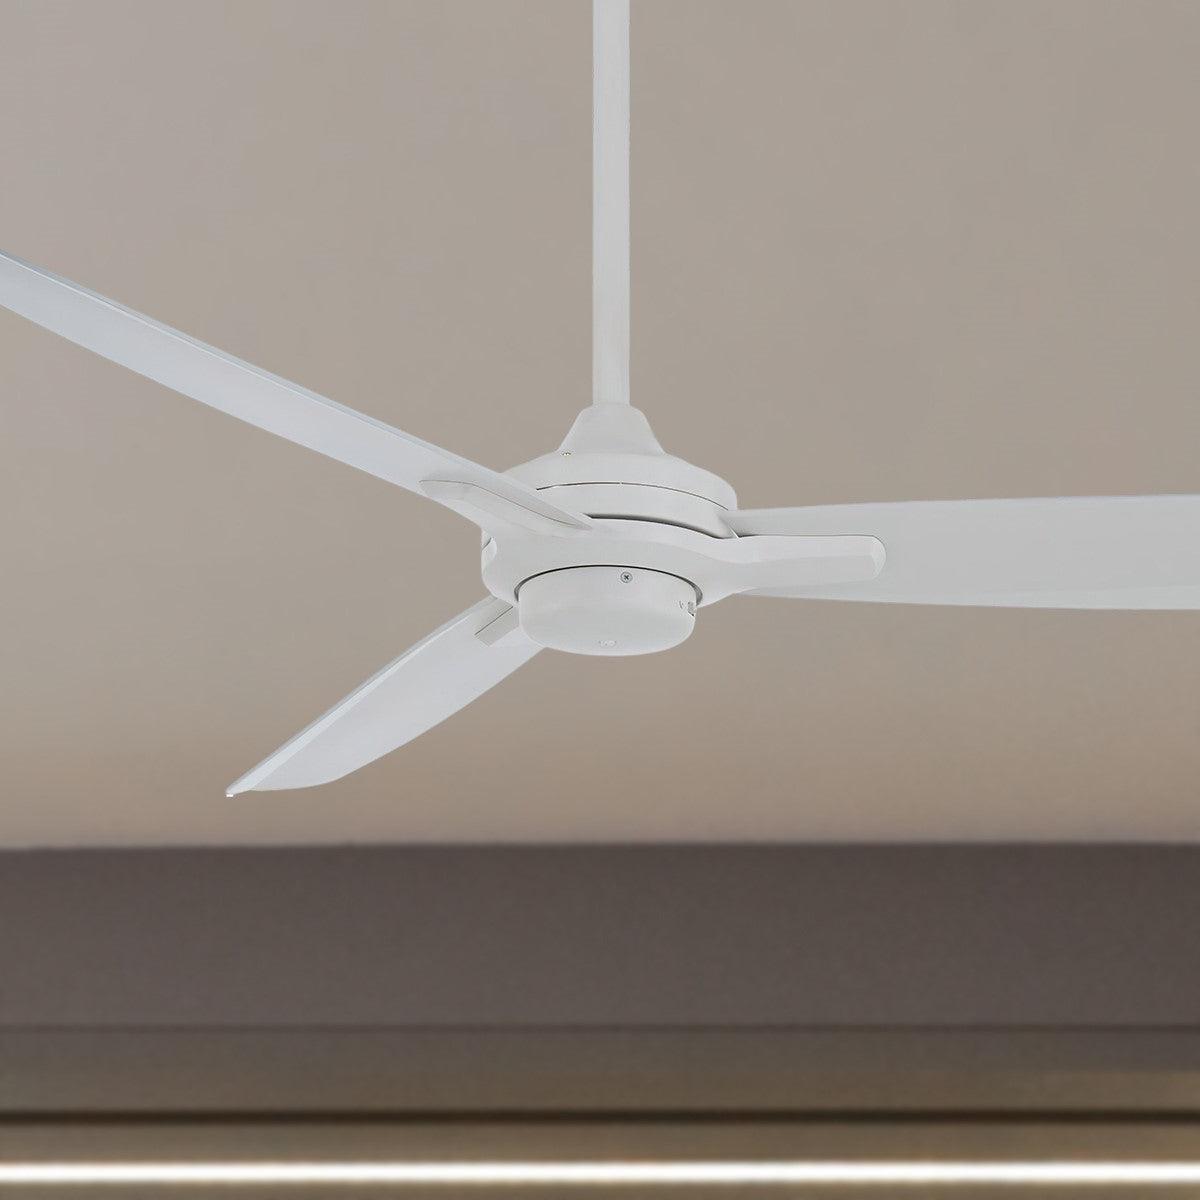 Rudolph 52 Inch Ceiling Fan With Wall Control